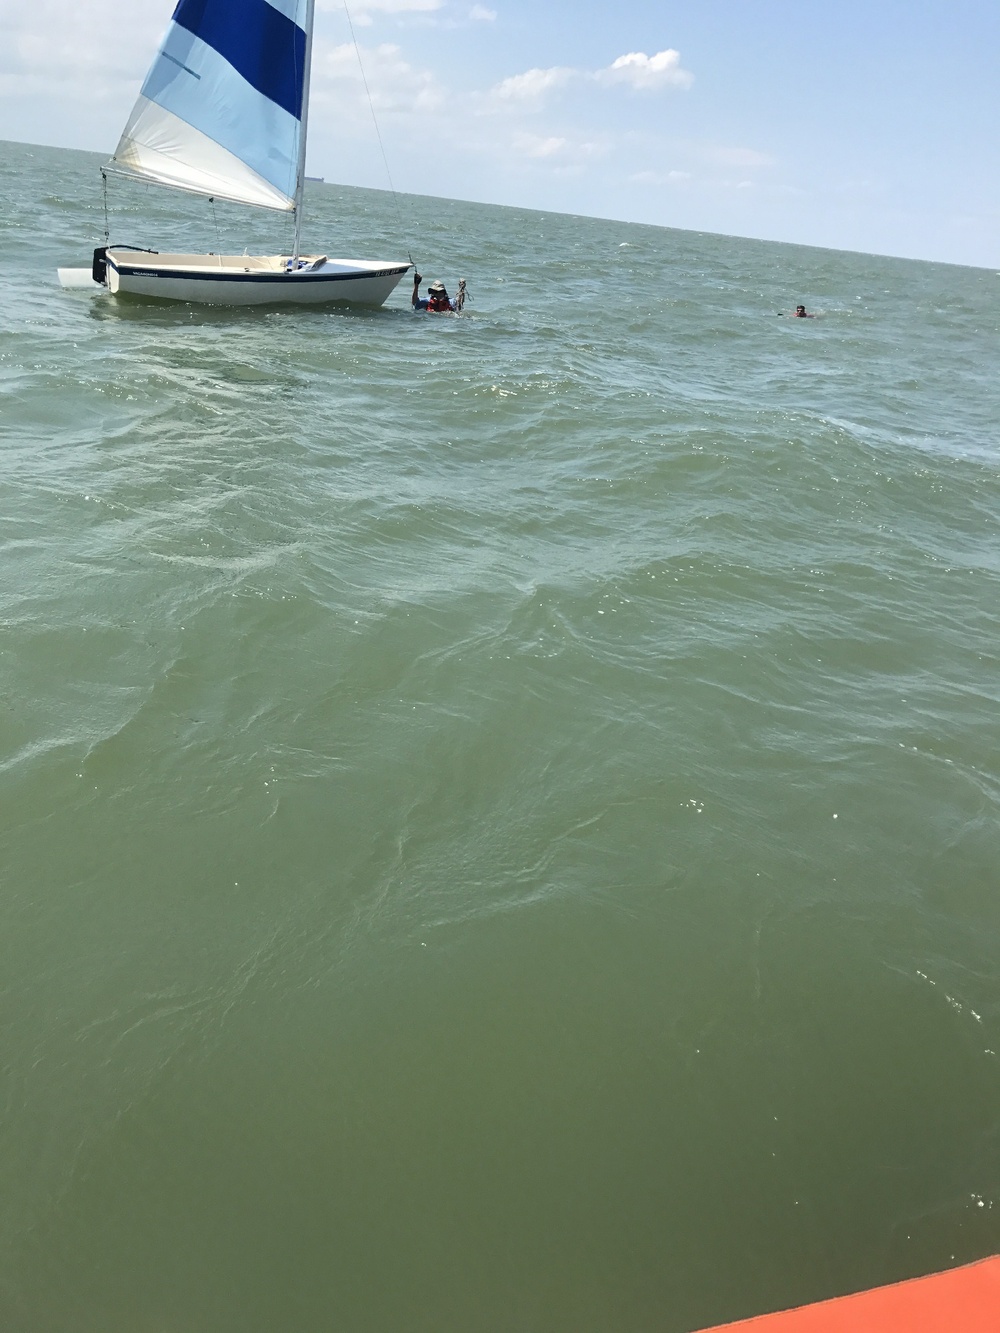 Coast Guard rescues 2 from water off Cape Charles, VA